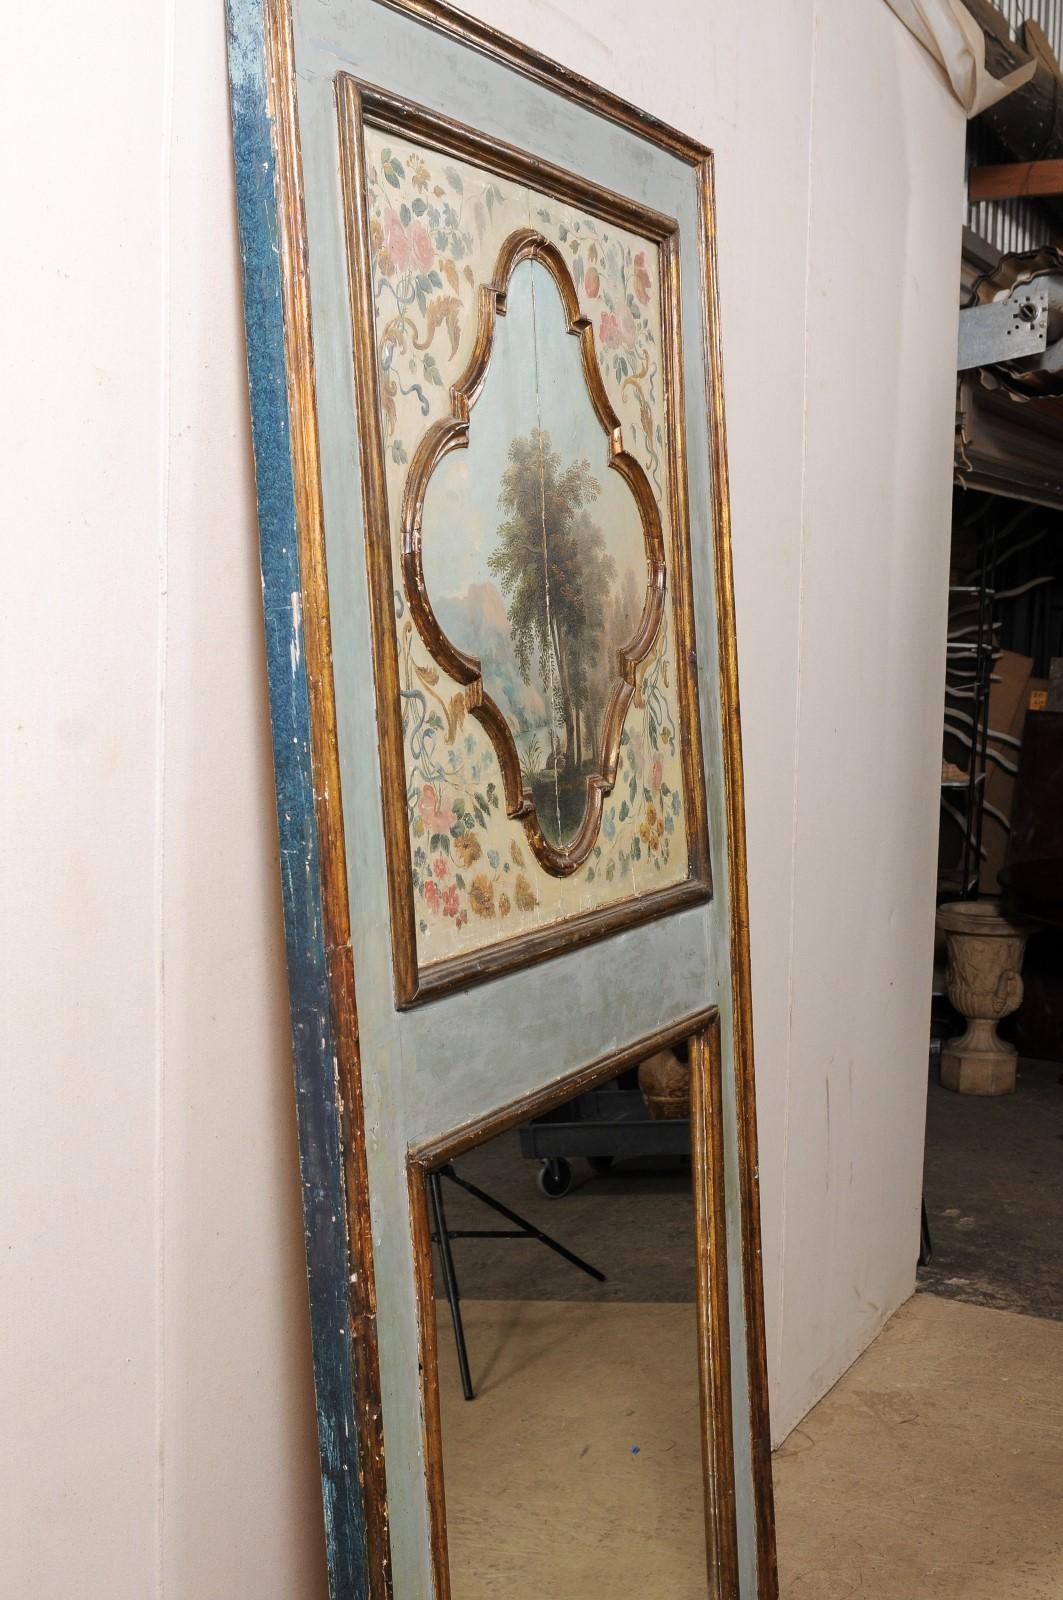 Italian 19th C. Pier Mirror w/ Serene Landscape Oil Painting at Top Panel For Sale 5